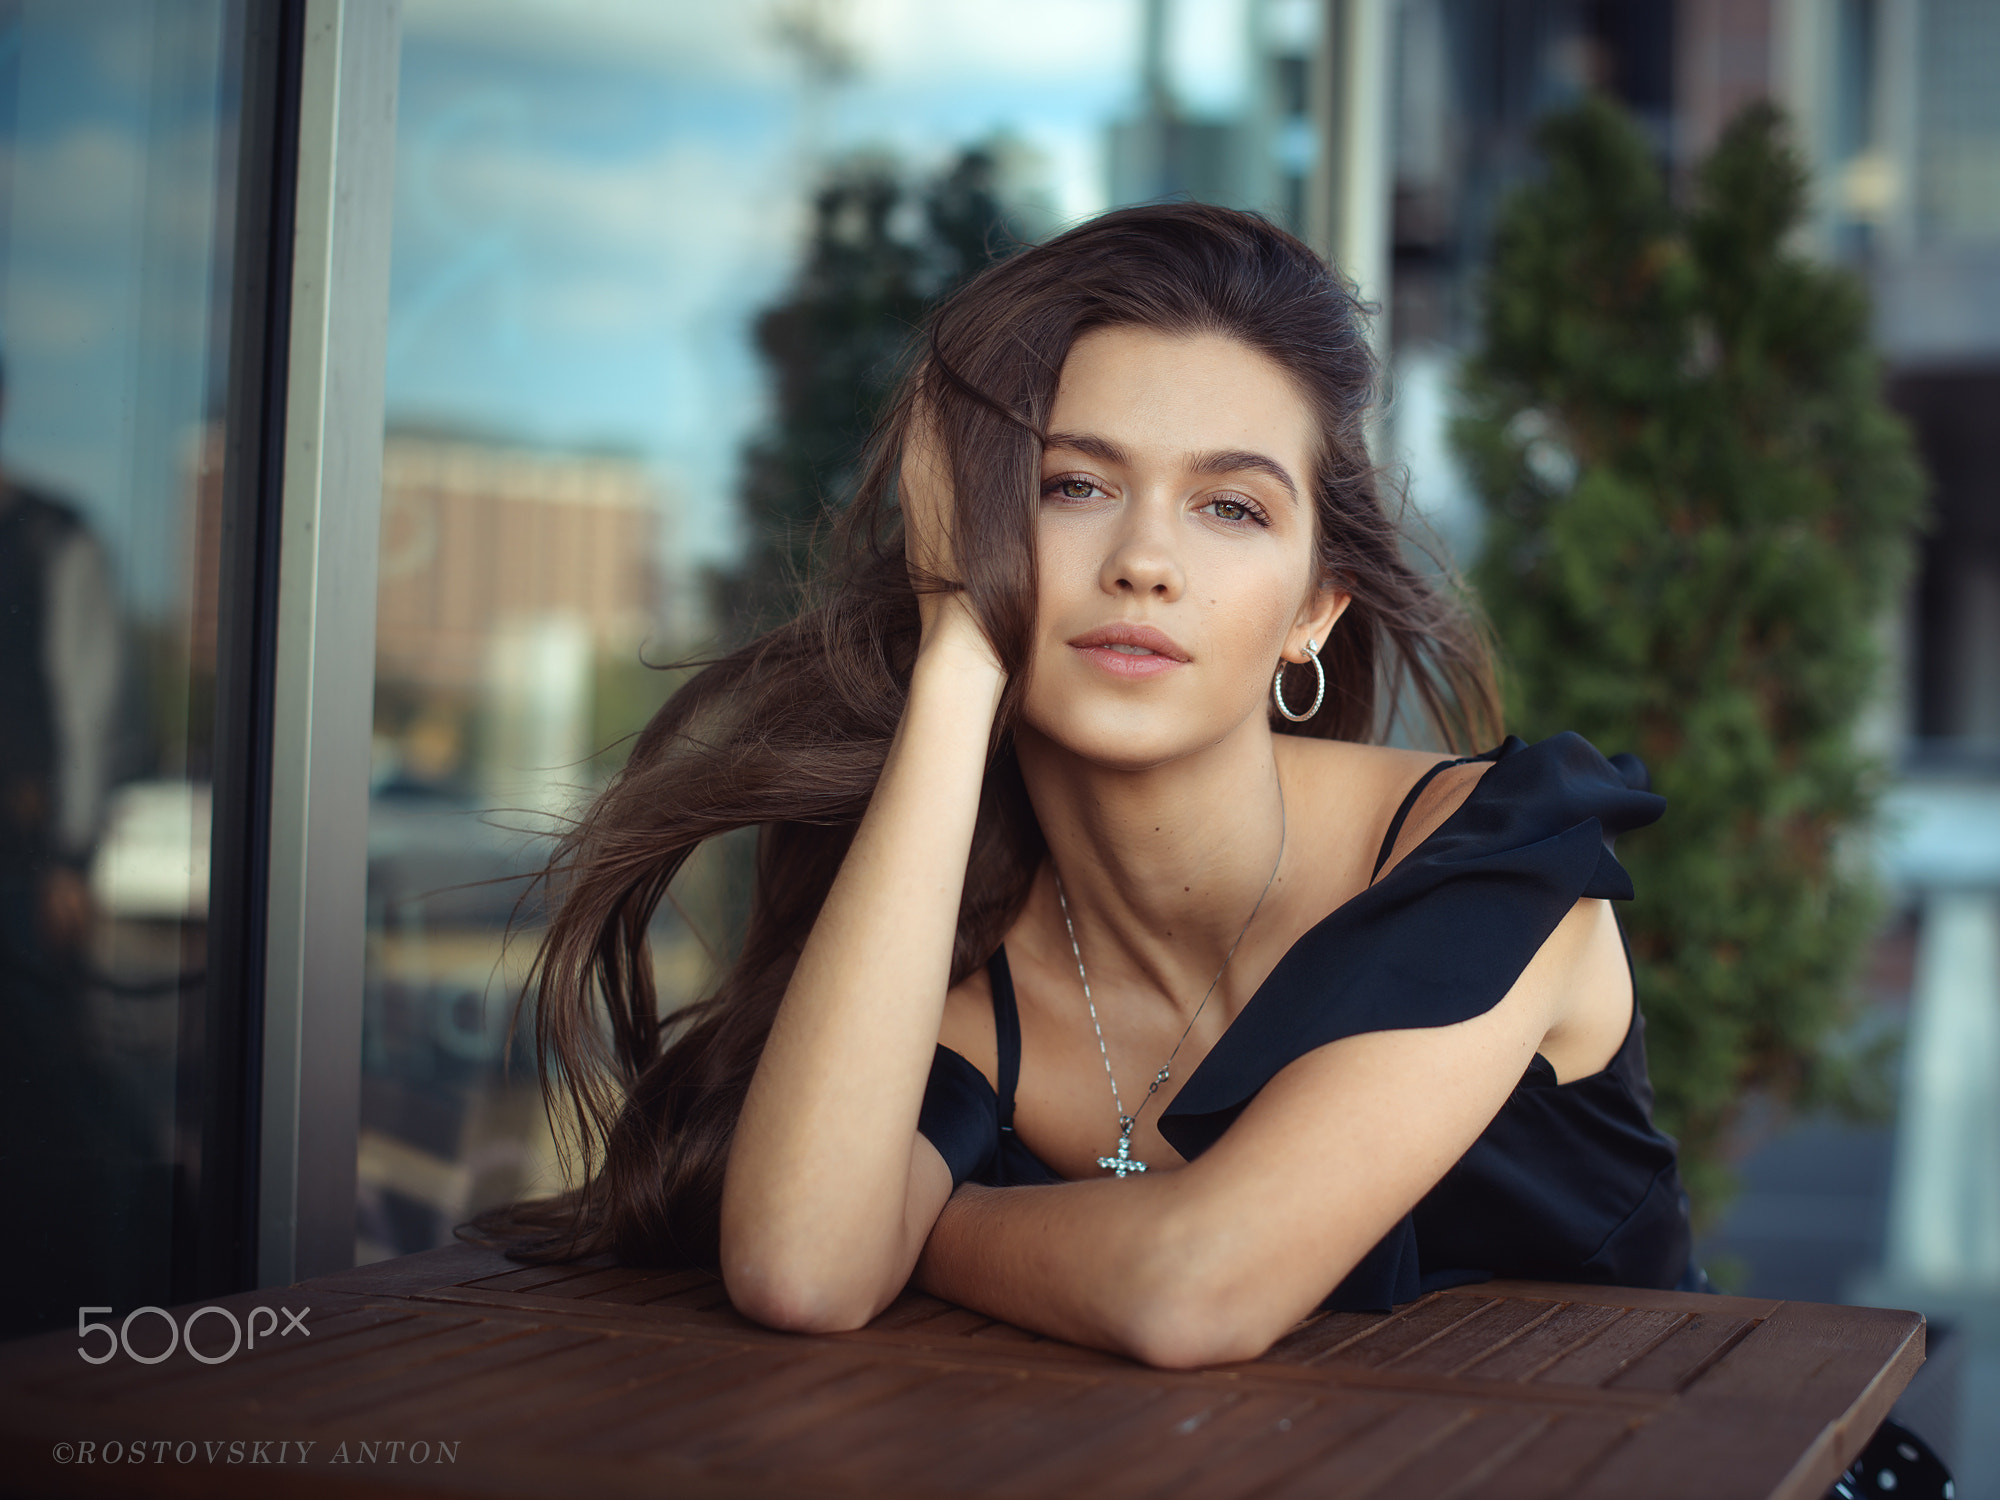 People 2000x1500 Anton Rostovskiy women brunette hands in hair wind looking at viewer necklace outdoors face watermarked 500px